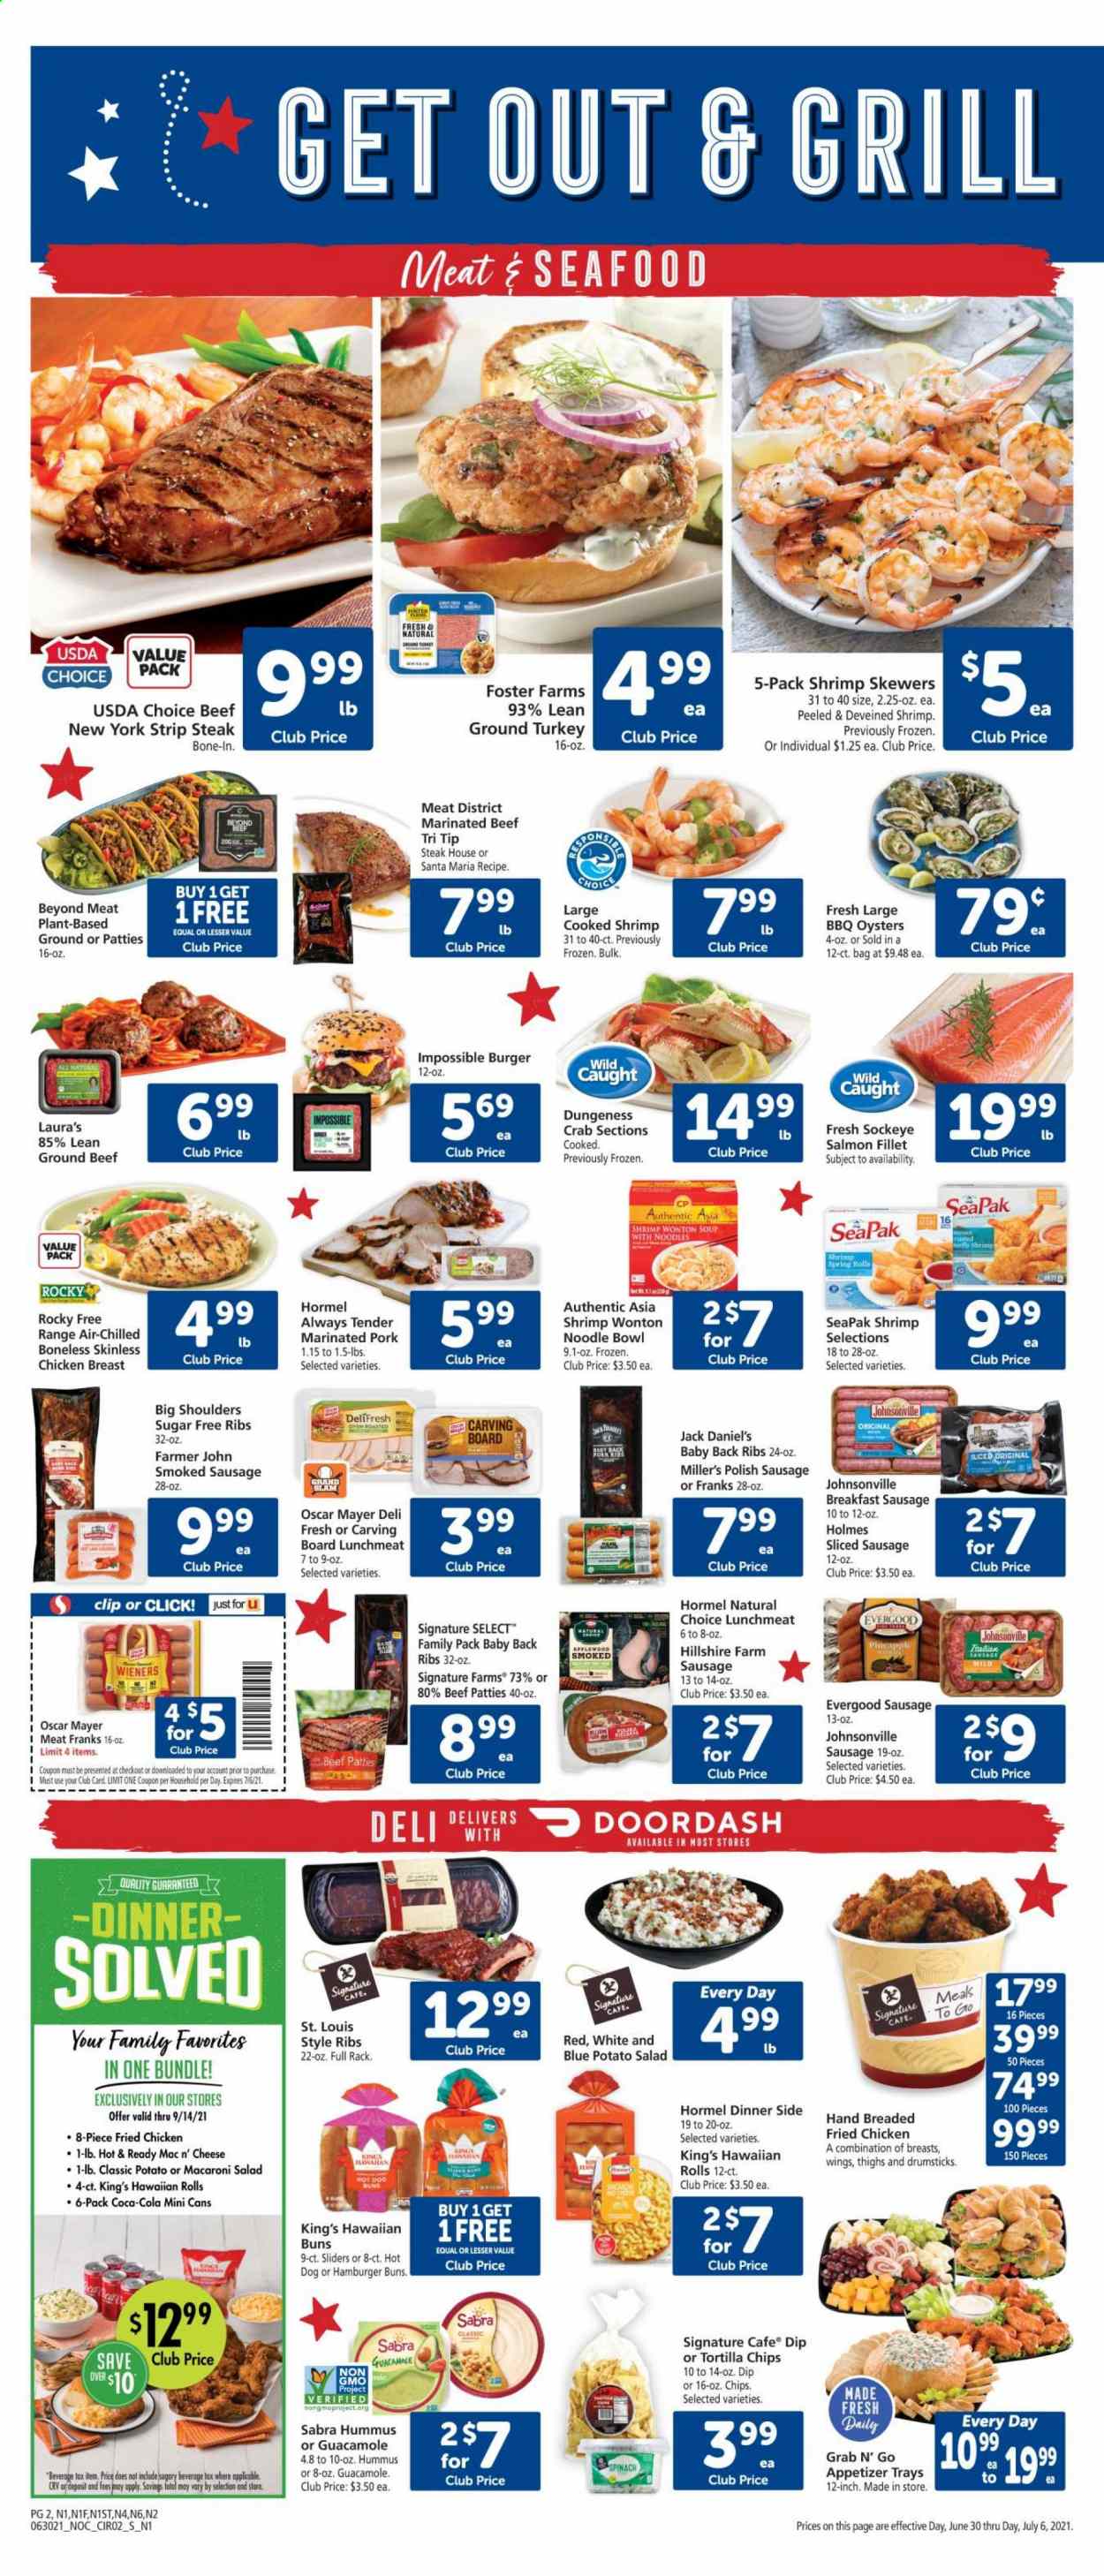 thumbnail - Safeway Flyer - 06/30/2021 - 07/06/2021 - Sales products - buns, burger buns, hawaiian rolls, ground turkey, beef meat, ground beef, steak, striploin steak, marinated beef, Johnsonville, pork meat, pork ribs, pork back ribs, marinated pork, salmon, salmon fillet, oysters, seafood, crab, shrimps, hot dog, Jack Daniel's, soup, fried chicken, noodles, Hormel, Hillshire Farm, Oscar Mayer, sausage, smoked sausage, polish sausage, sausage slices, lunch meat, cheese, tortilla chips, guacamole, Coca-Cola, Miller, Lux. Page 2.